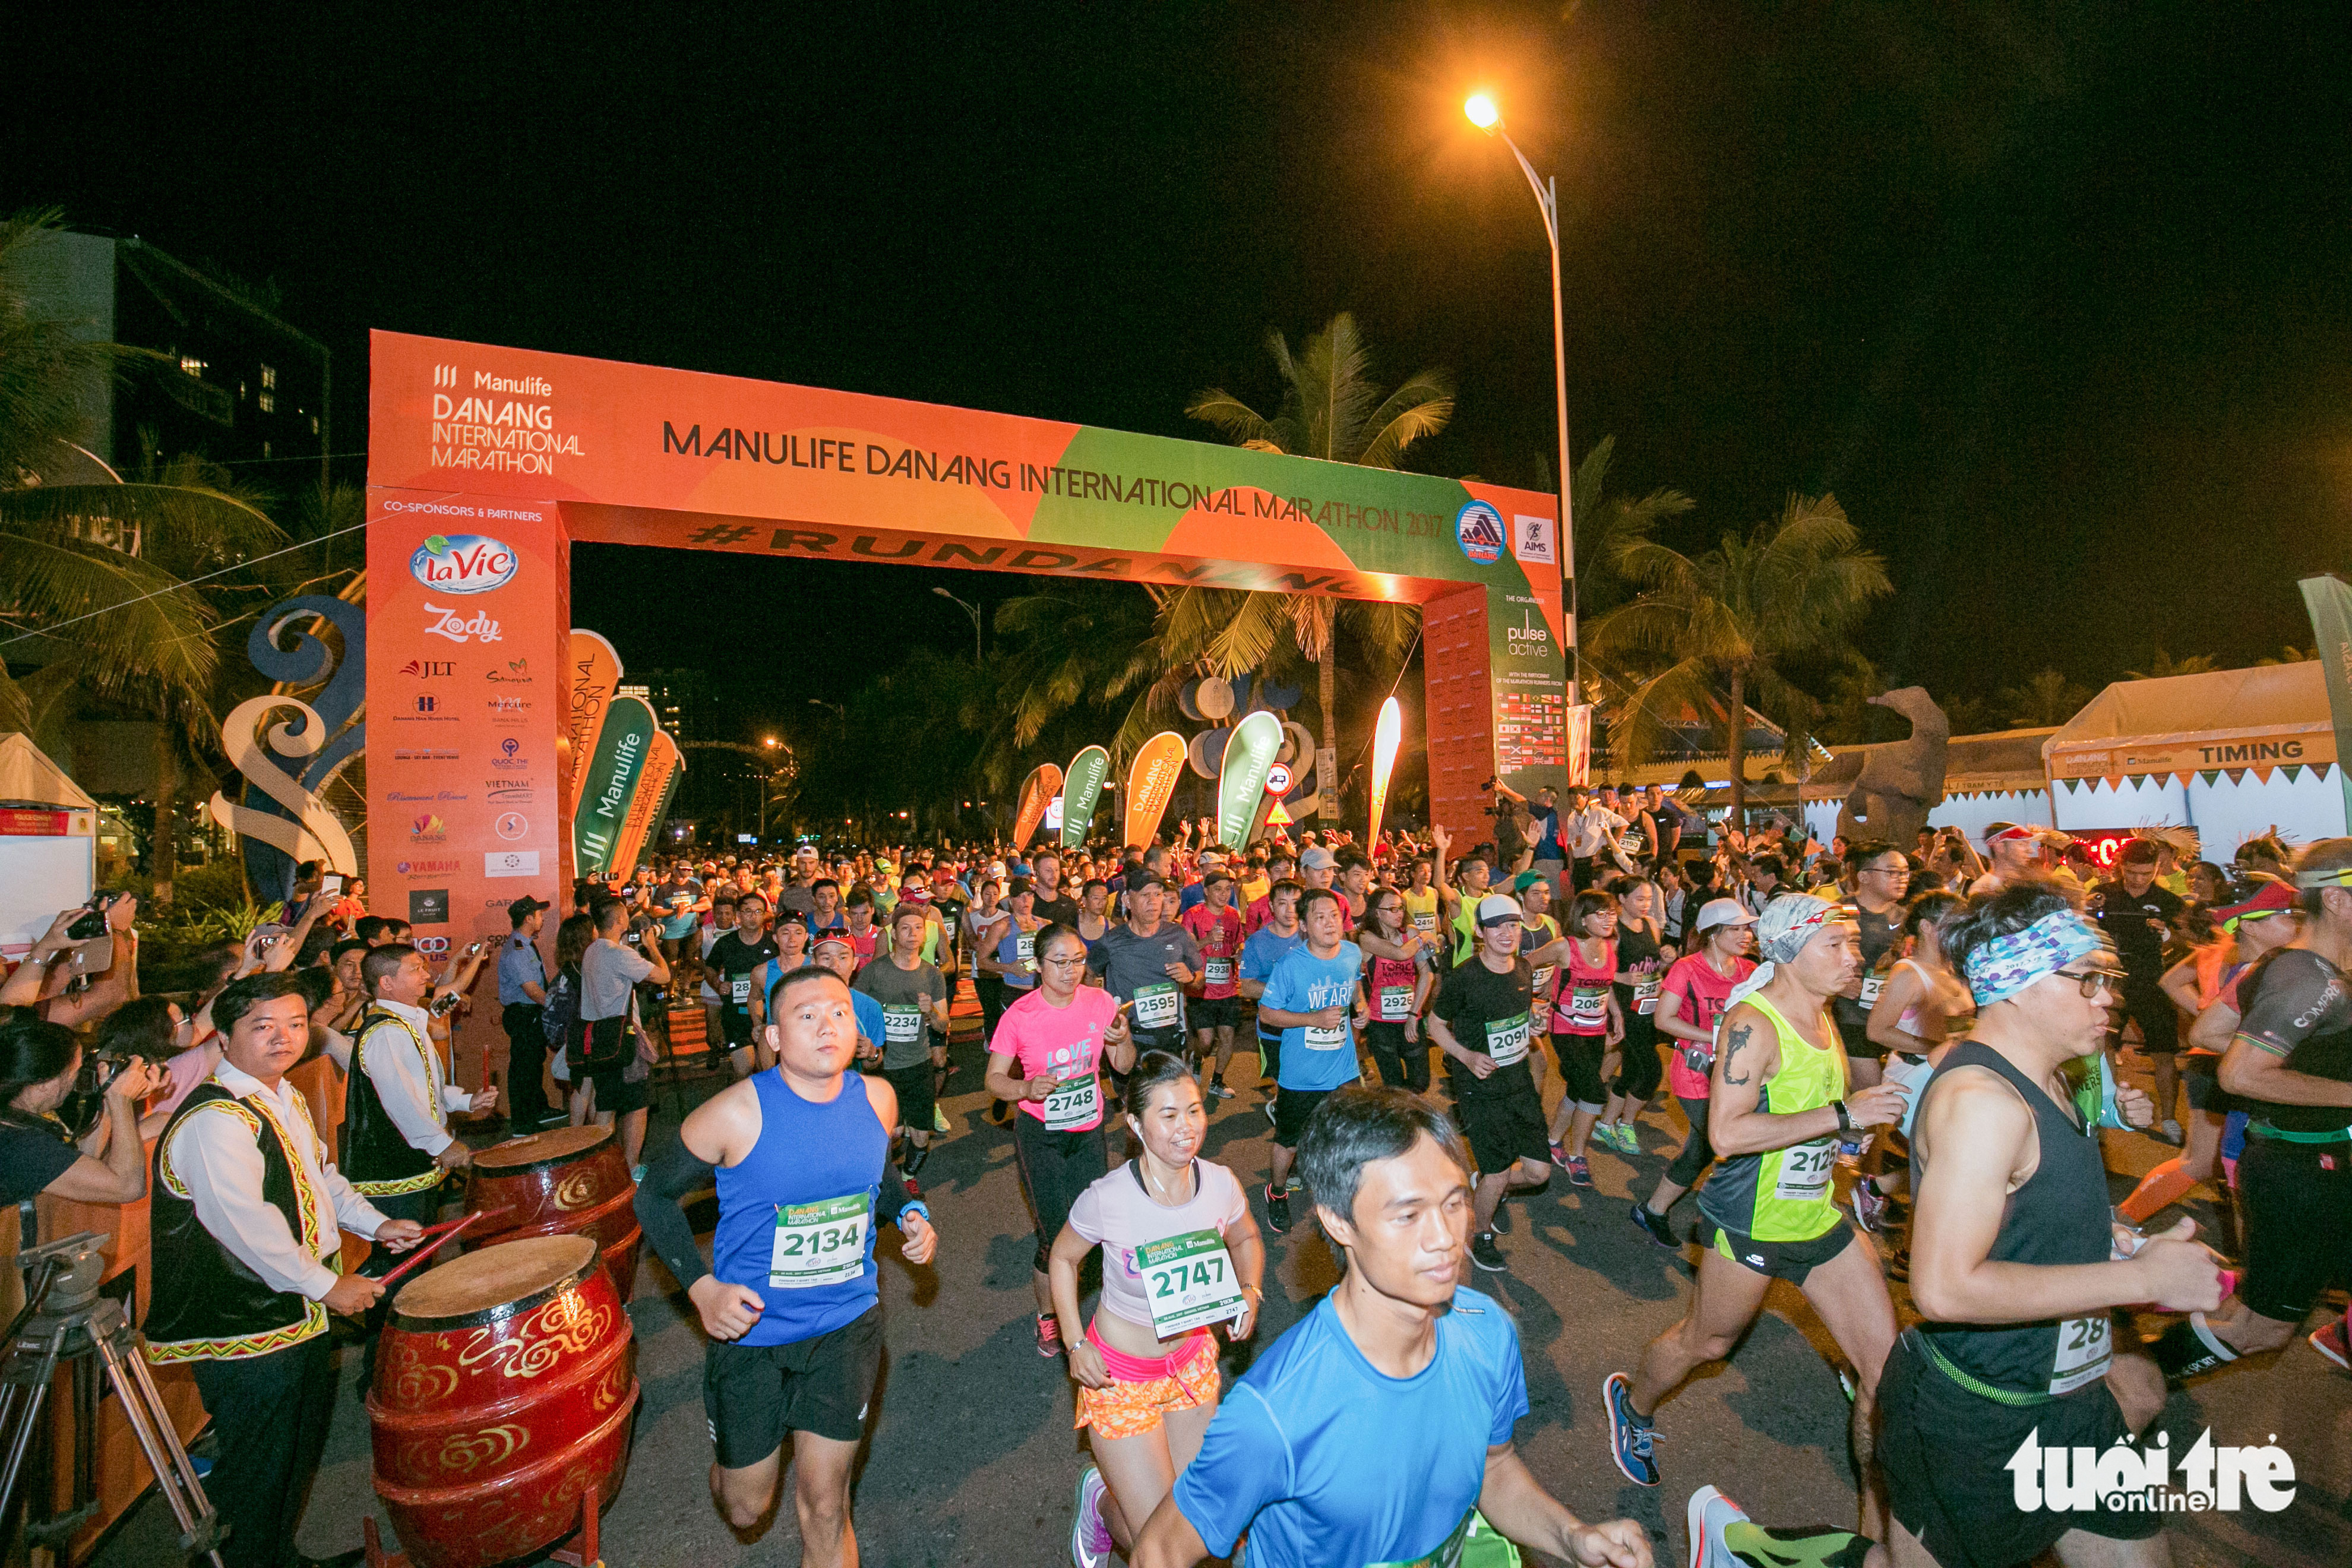 Da Nang’s popular annual marathon resumes with 5,000 runners after two-year disruption